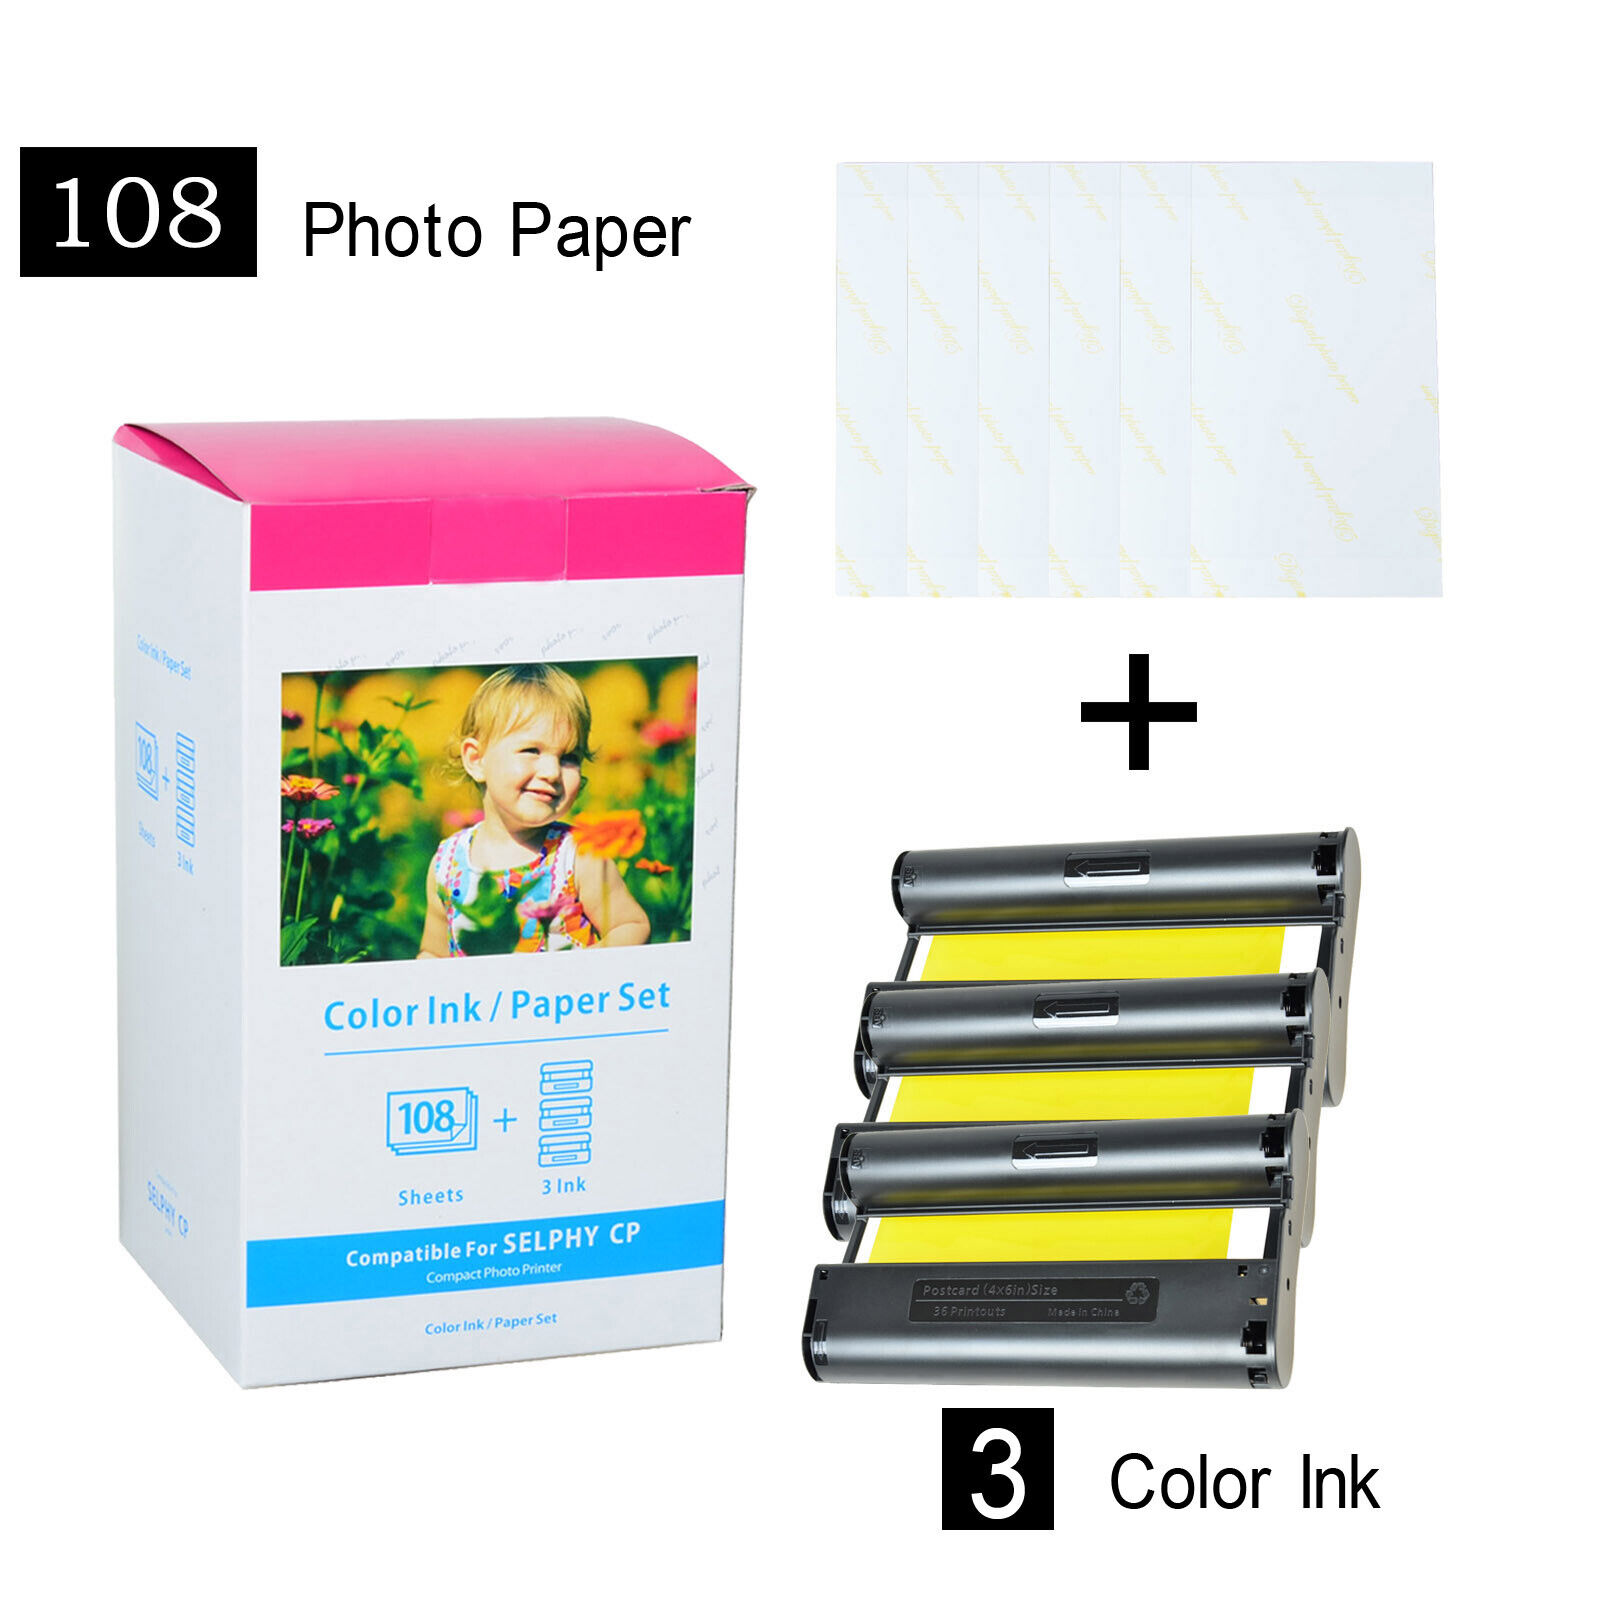 KP-108IN 3 x Ink and 108 Paper Sheets for Canon Selphy CP900 CP910 CP1300 CP780